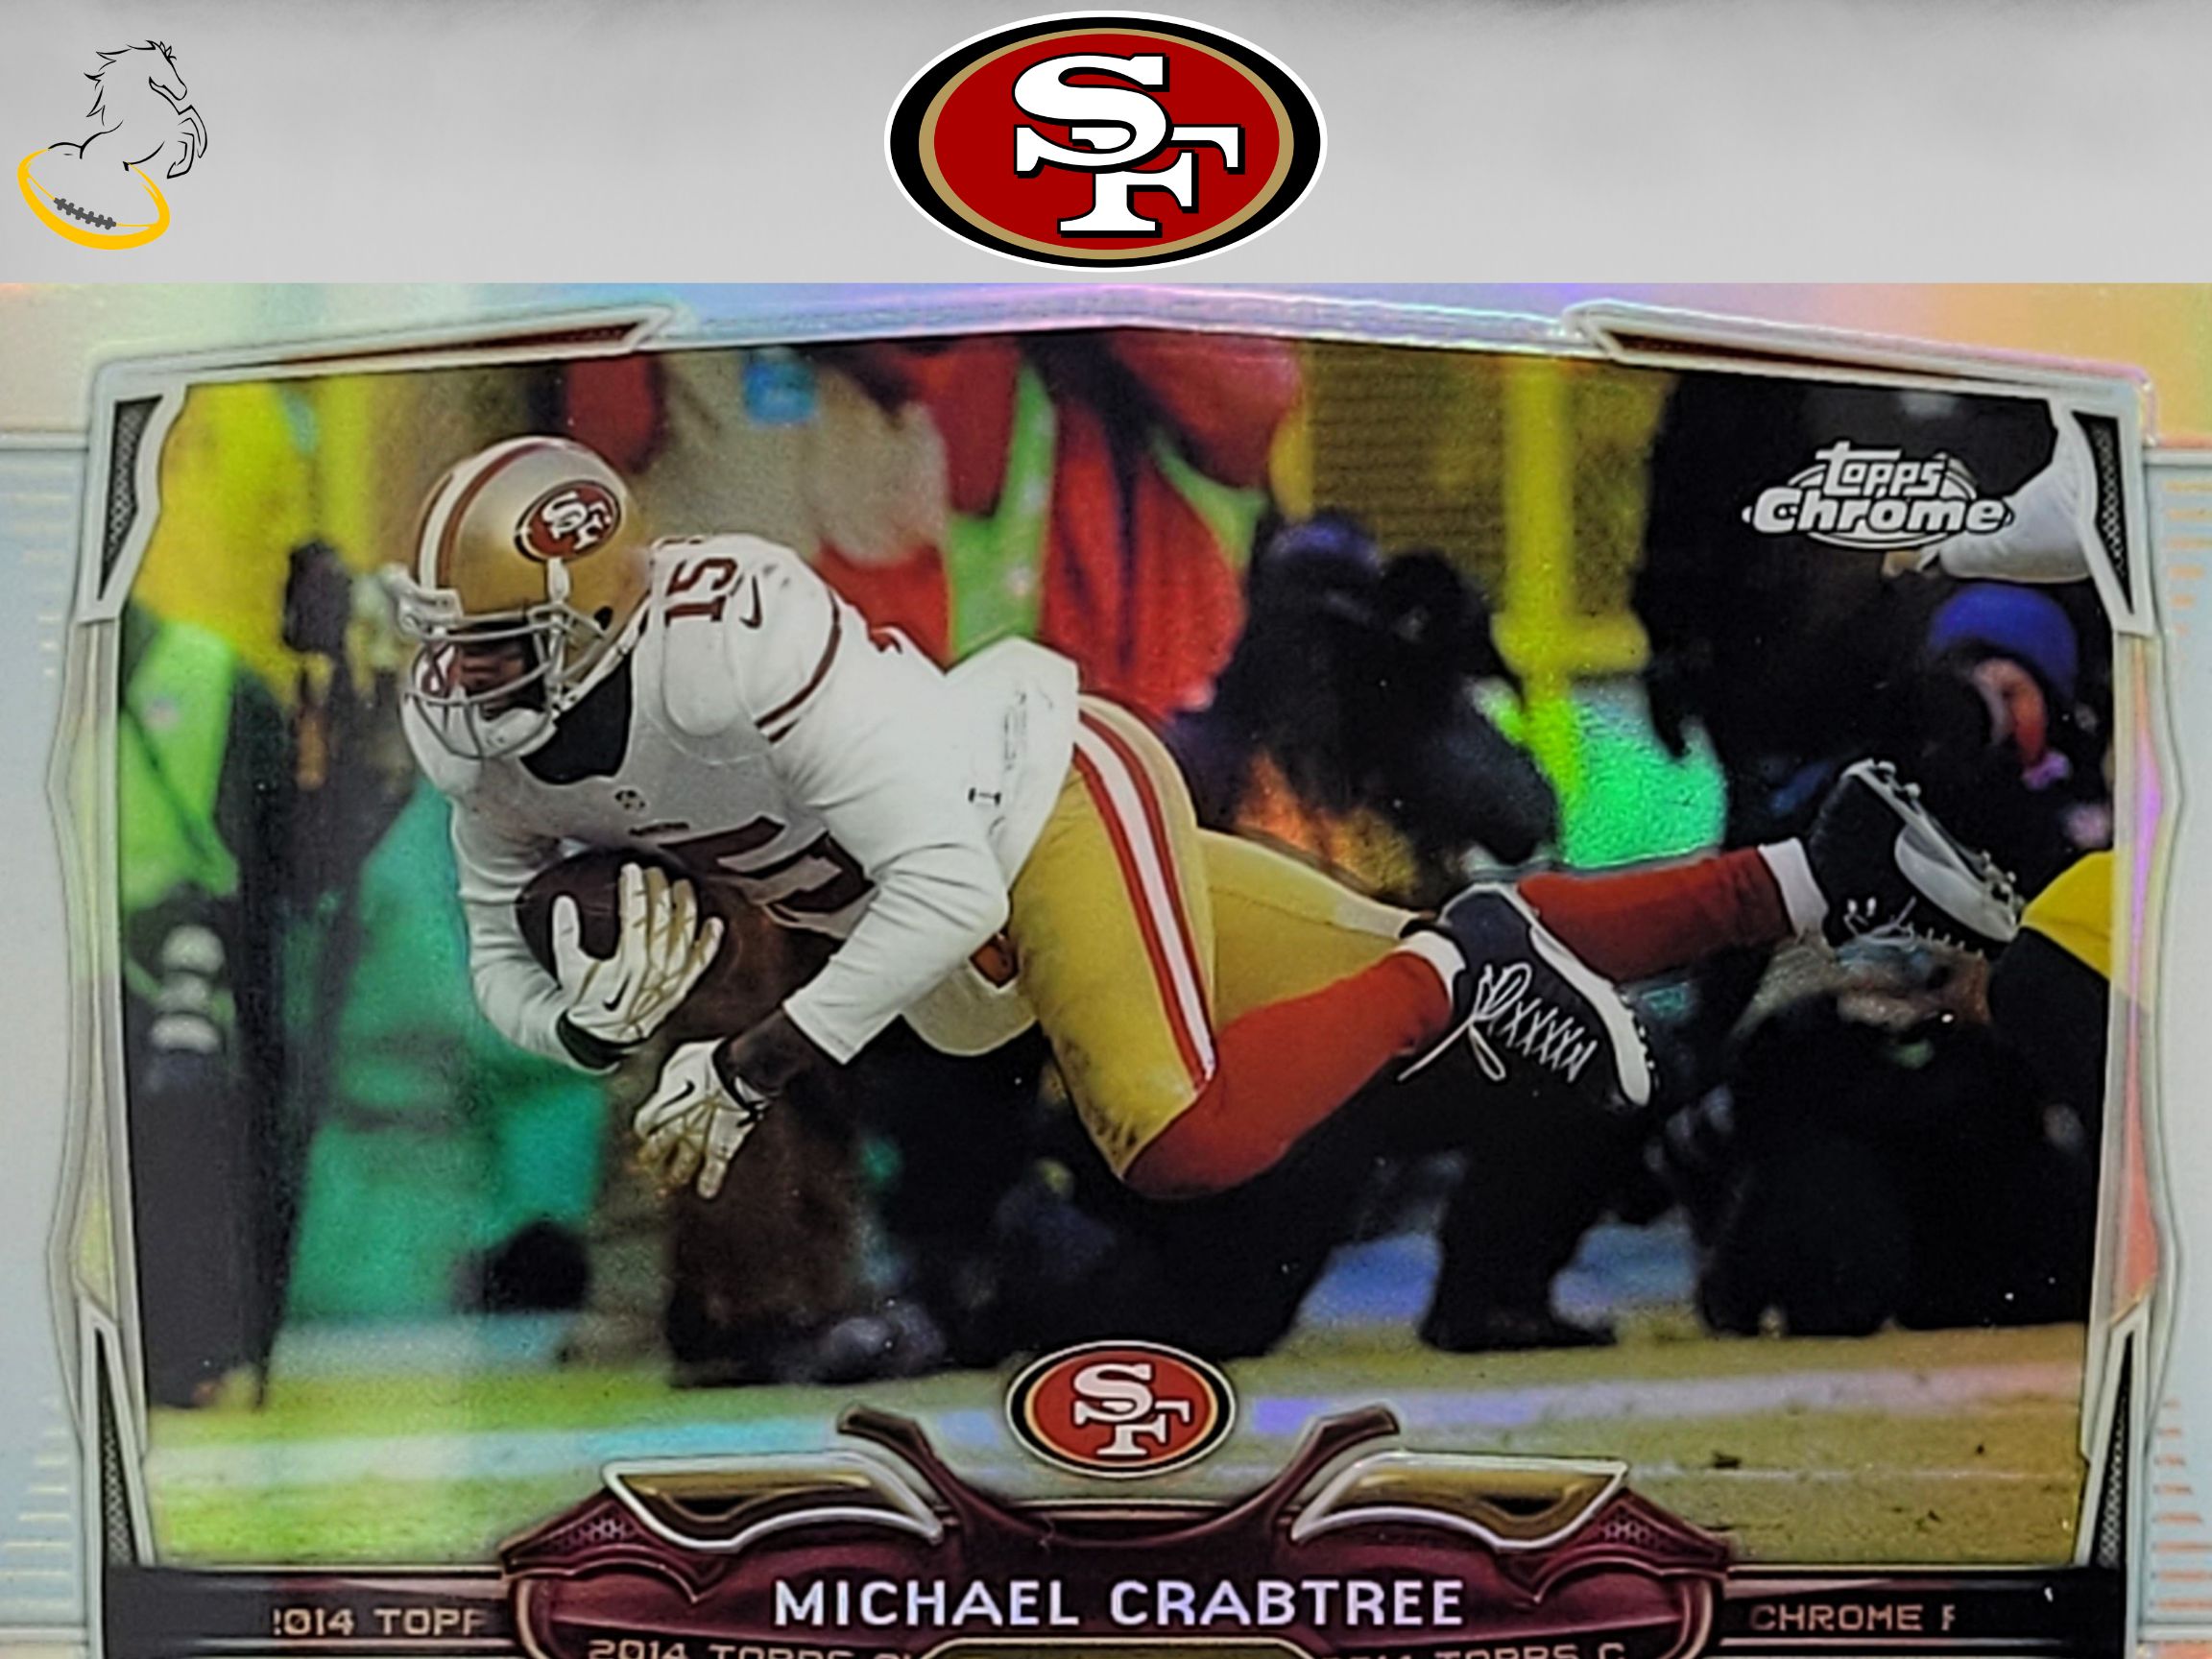 2014 Topps Chrome Michael Crabtree Silver Refractor